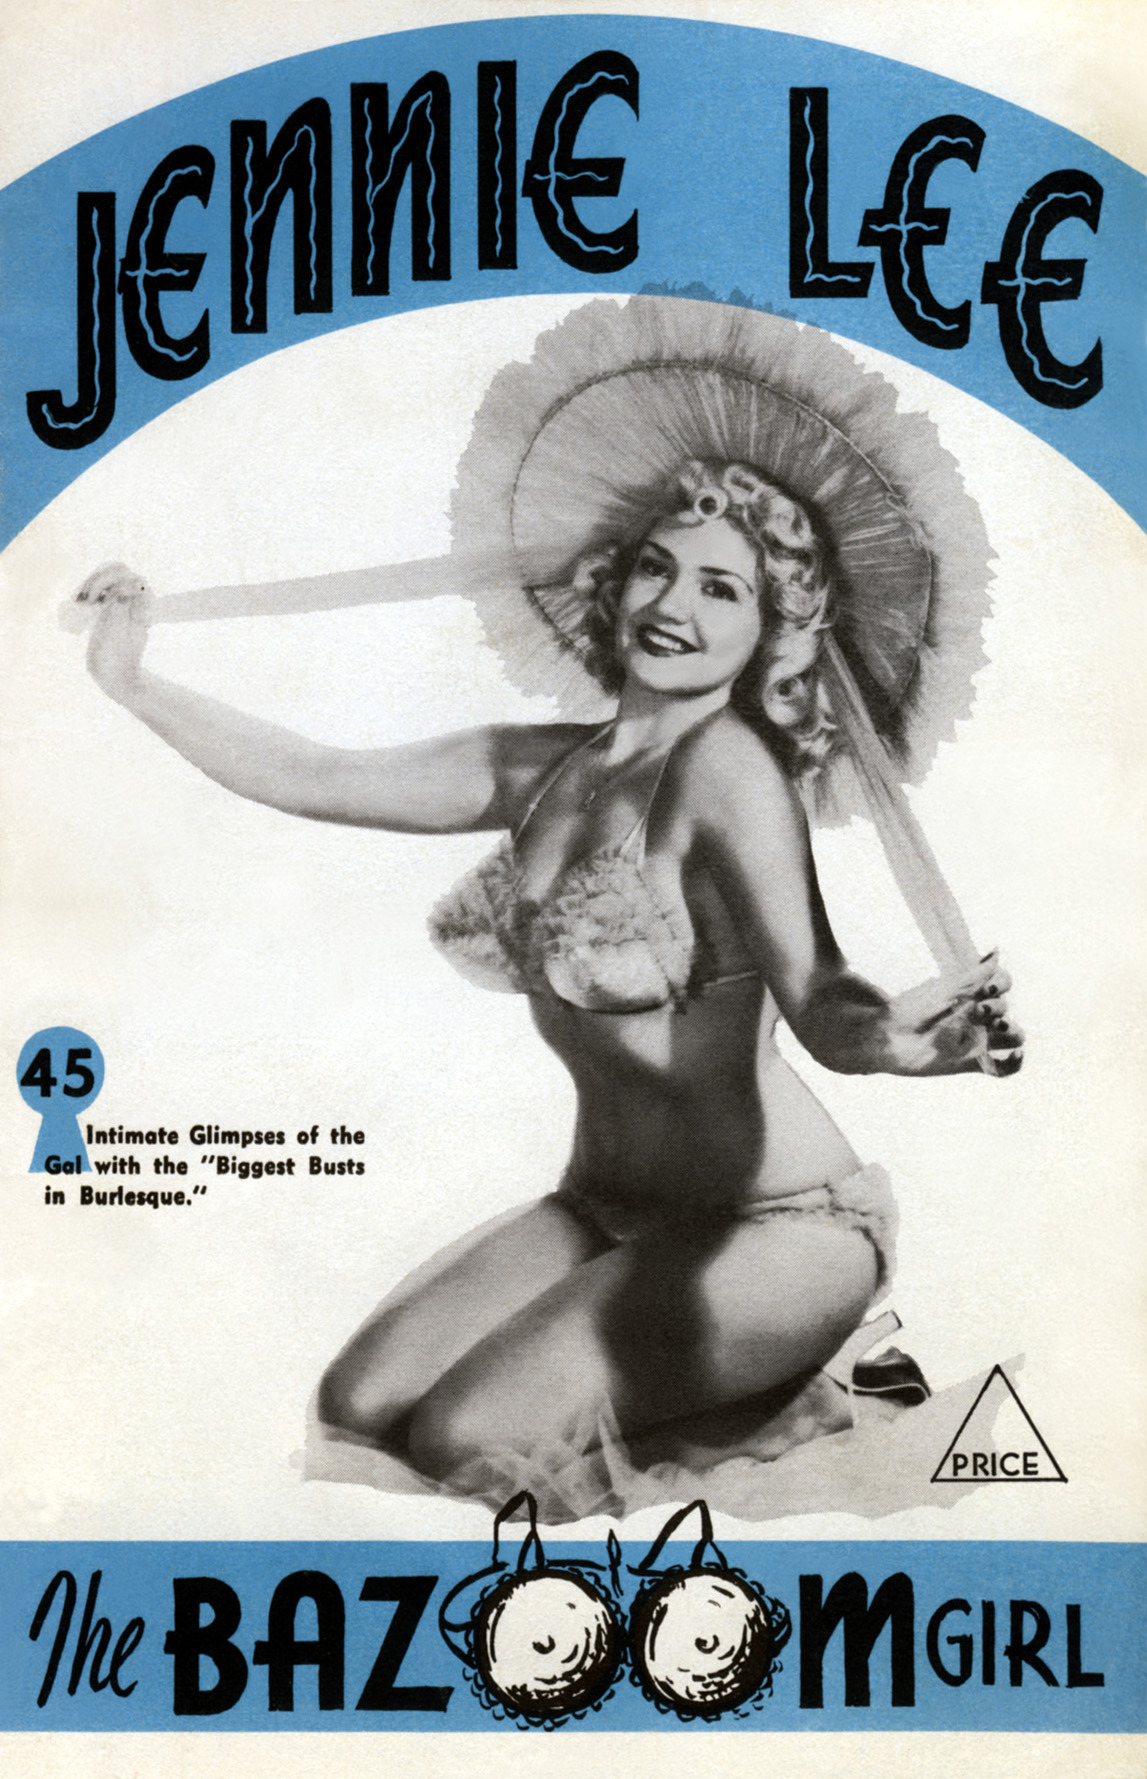 Jennie Lee appears on the cover of her own 14-page promotional booklet,  detailing